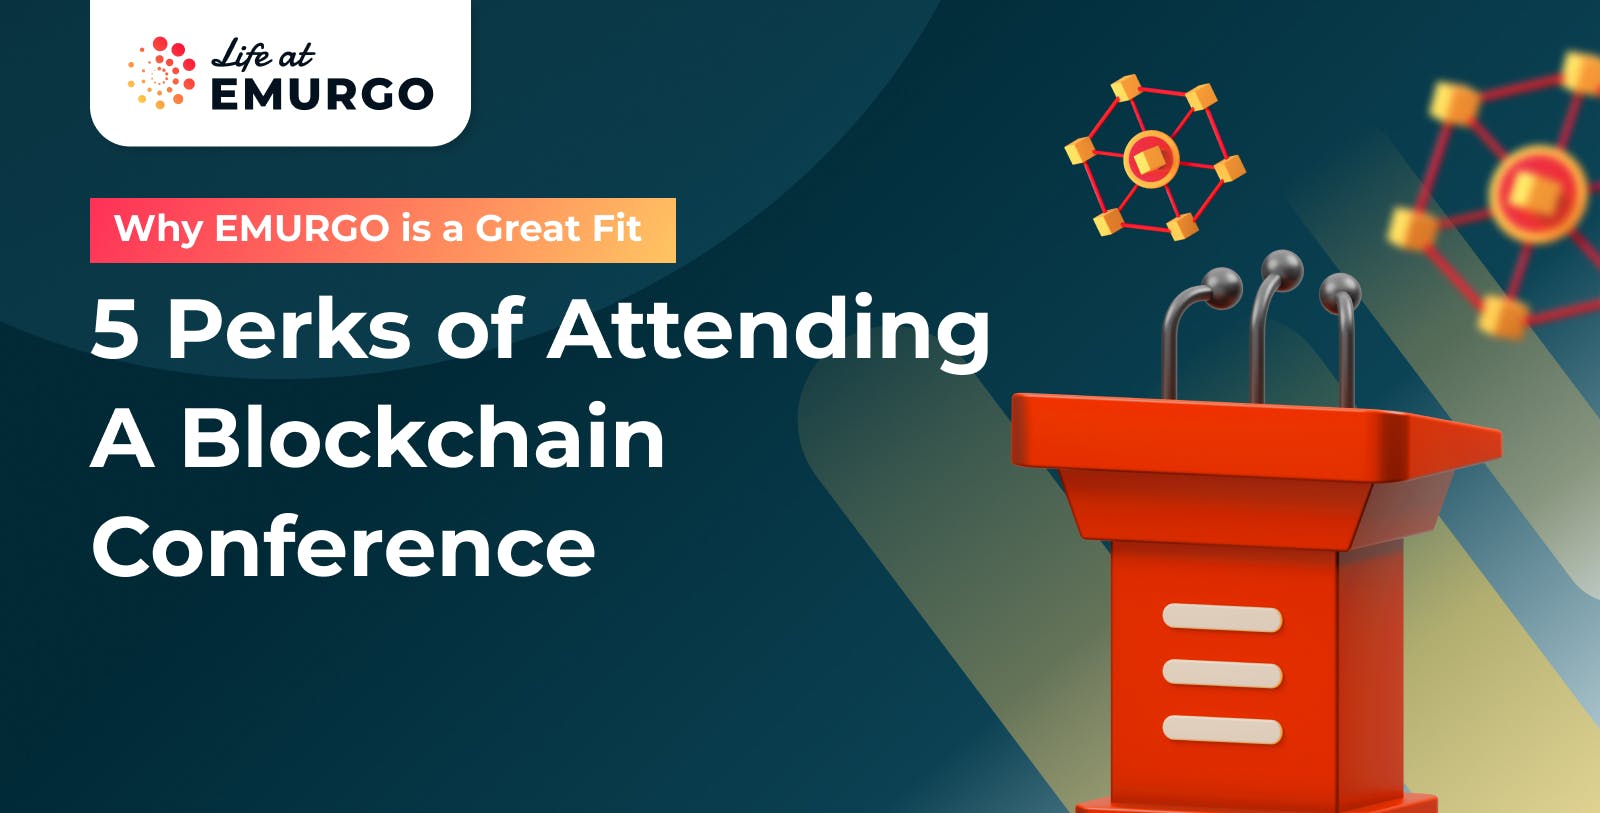 Blog-Series-Why-EMURGO-is-a-Great-Fit-5-Best-Reasons-to-Attend-a-Blockchain-Conference-3-1.jpg